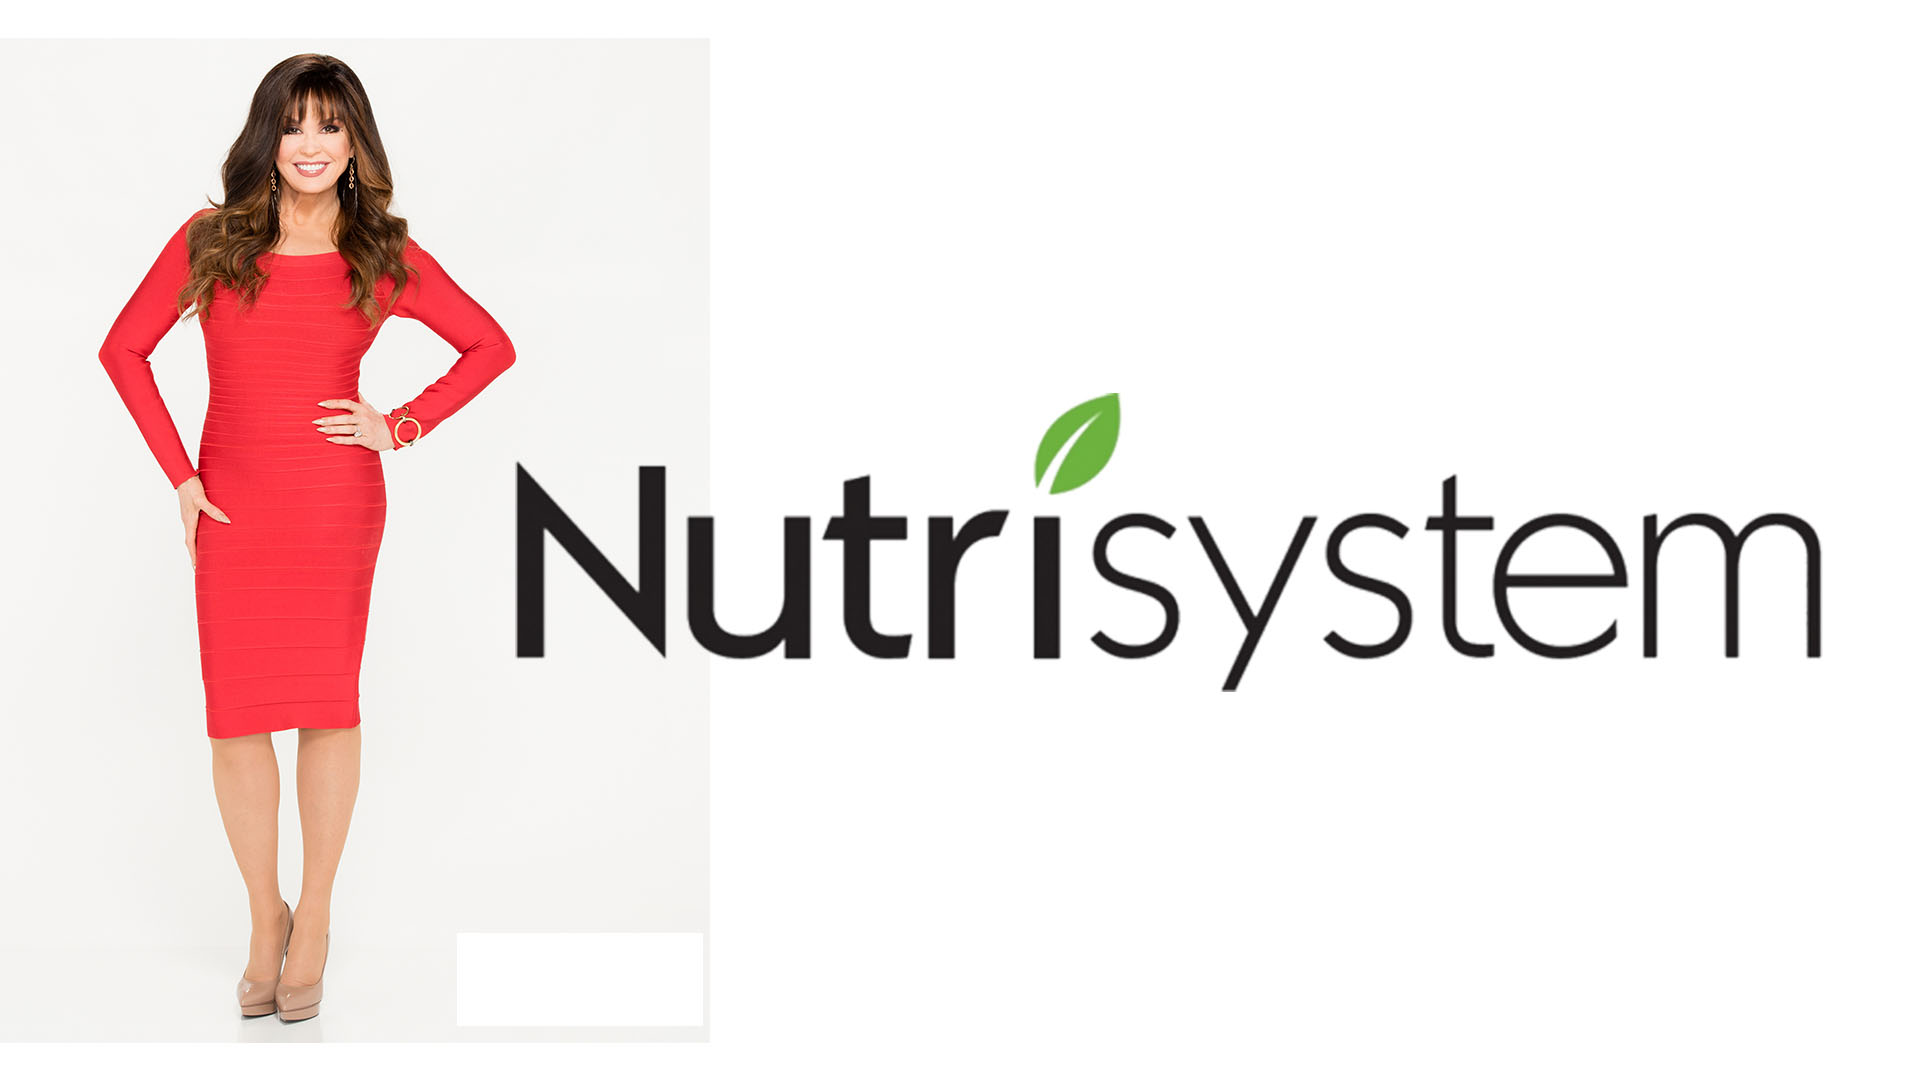 Nutrisystem Media Manager Featured Image